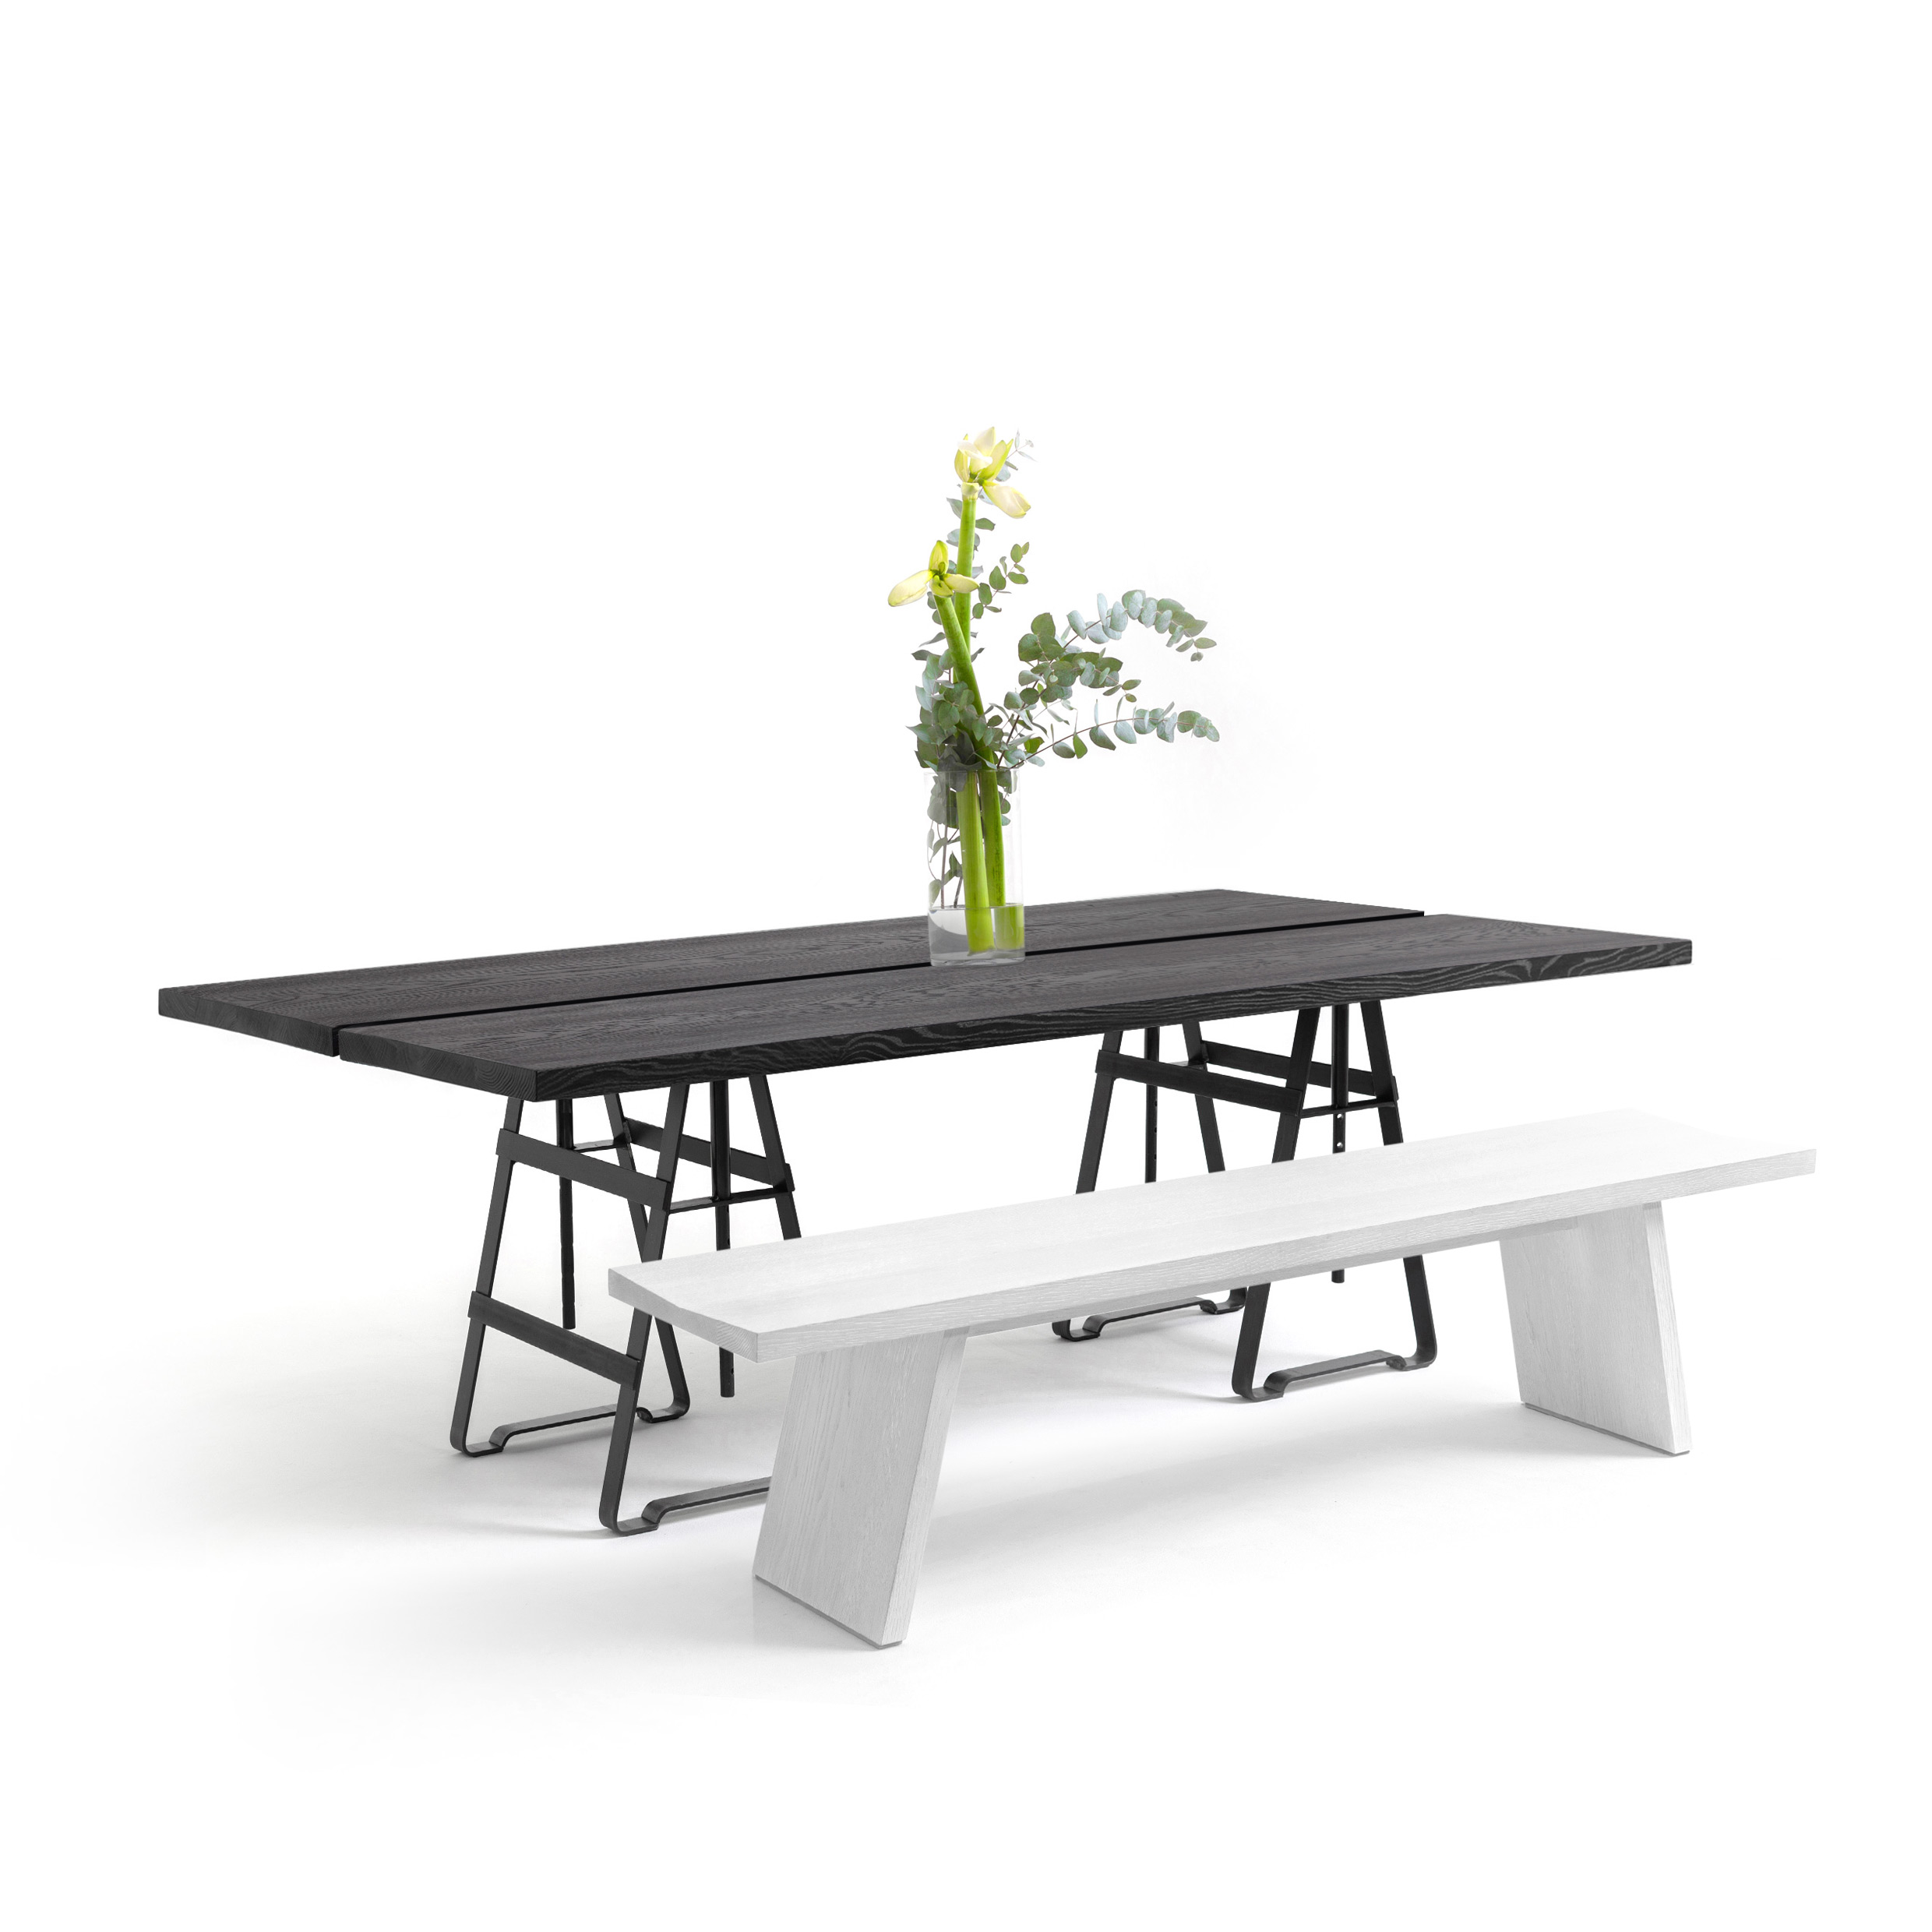 FORM EXCLUSIVE // JOON - IN-/OUTDOOR TABLE | BLACK CARED - 260CM X 45CM X 5CM - MONKEY RAW